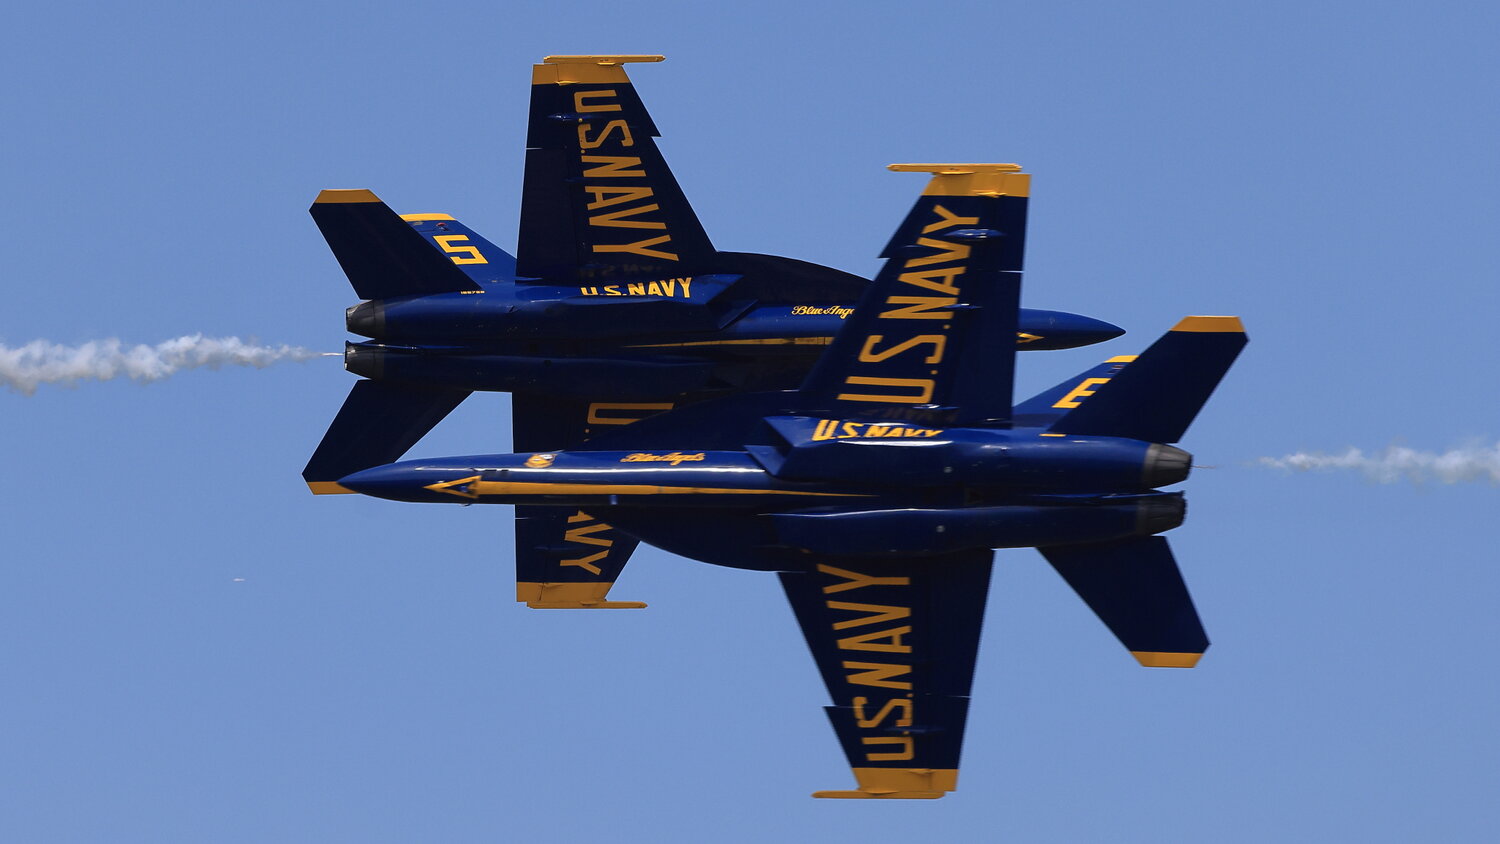 The opposing passes of the Blue Angels are spectacular to watch as they approach the crossing point at over 450 miles per hour from opposite directions. Even at a camera shutter speed of one-4,000th of a second, one of the jets has just a touch of blur...